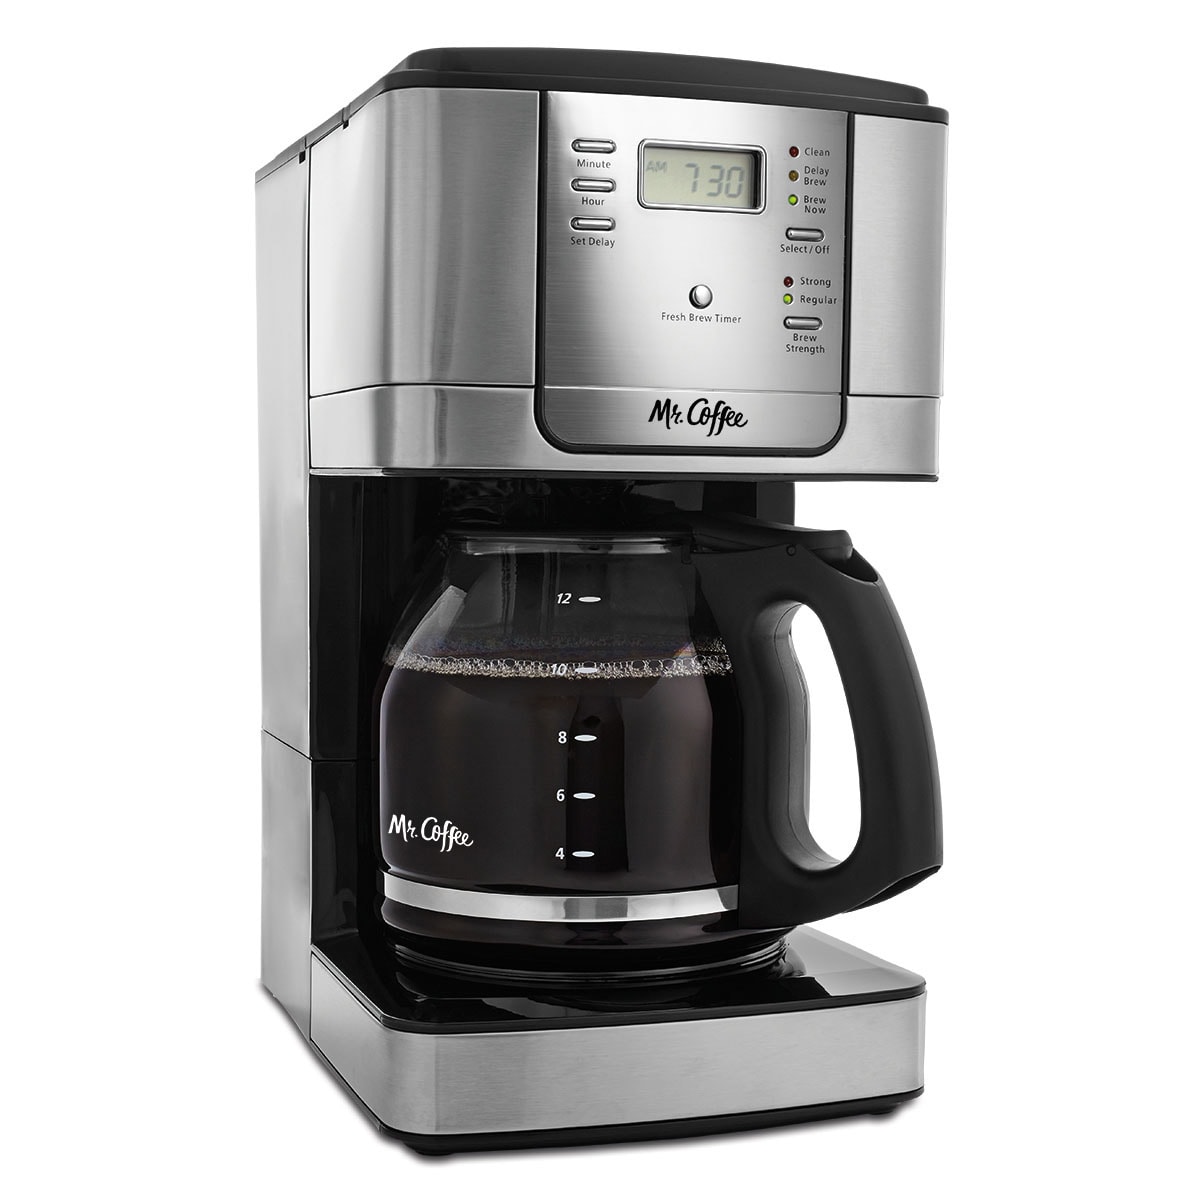 Mr. Coffee JWX9-RB Advanced Brew 5-cup Programmable Coffee Maker